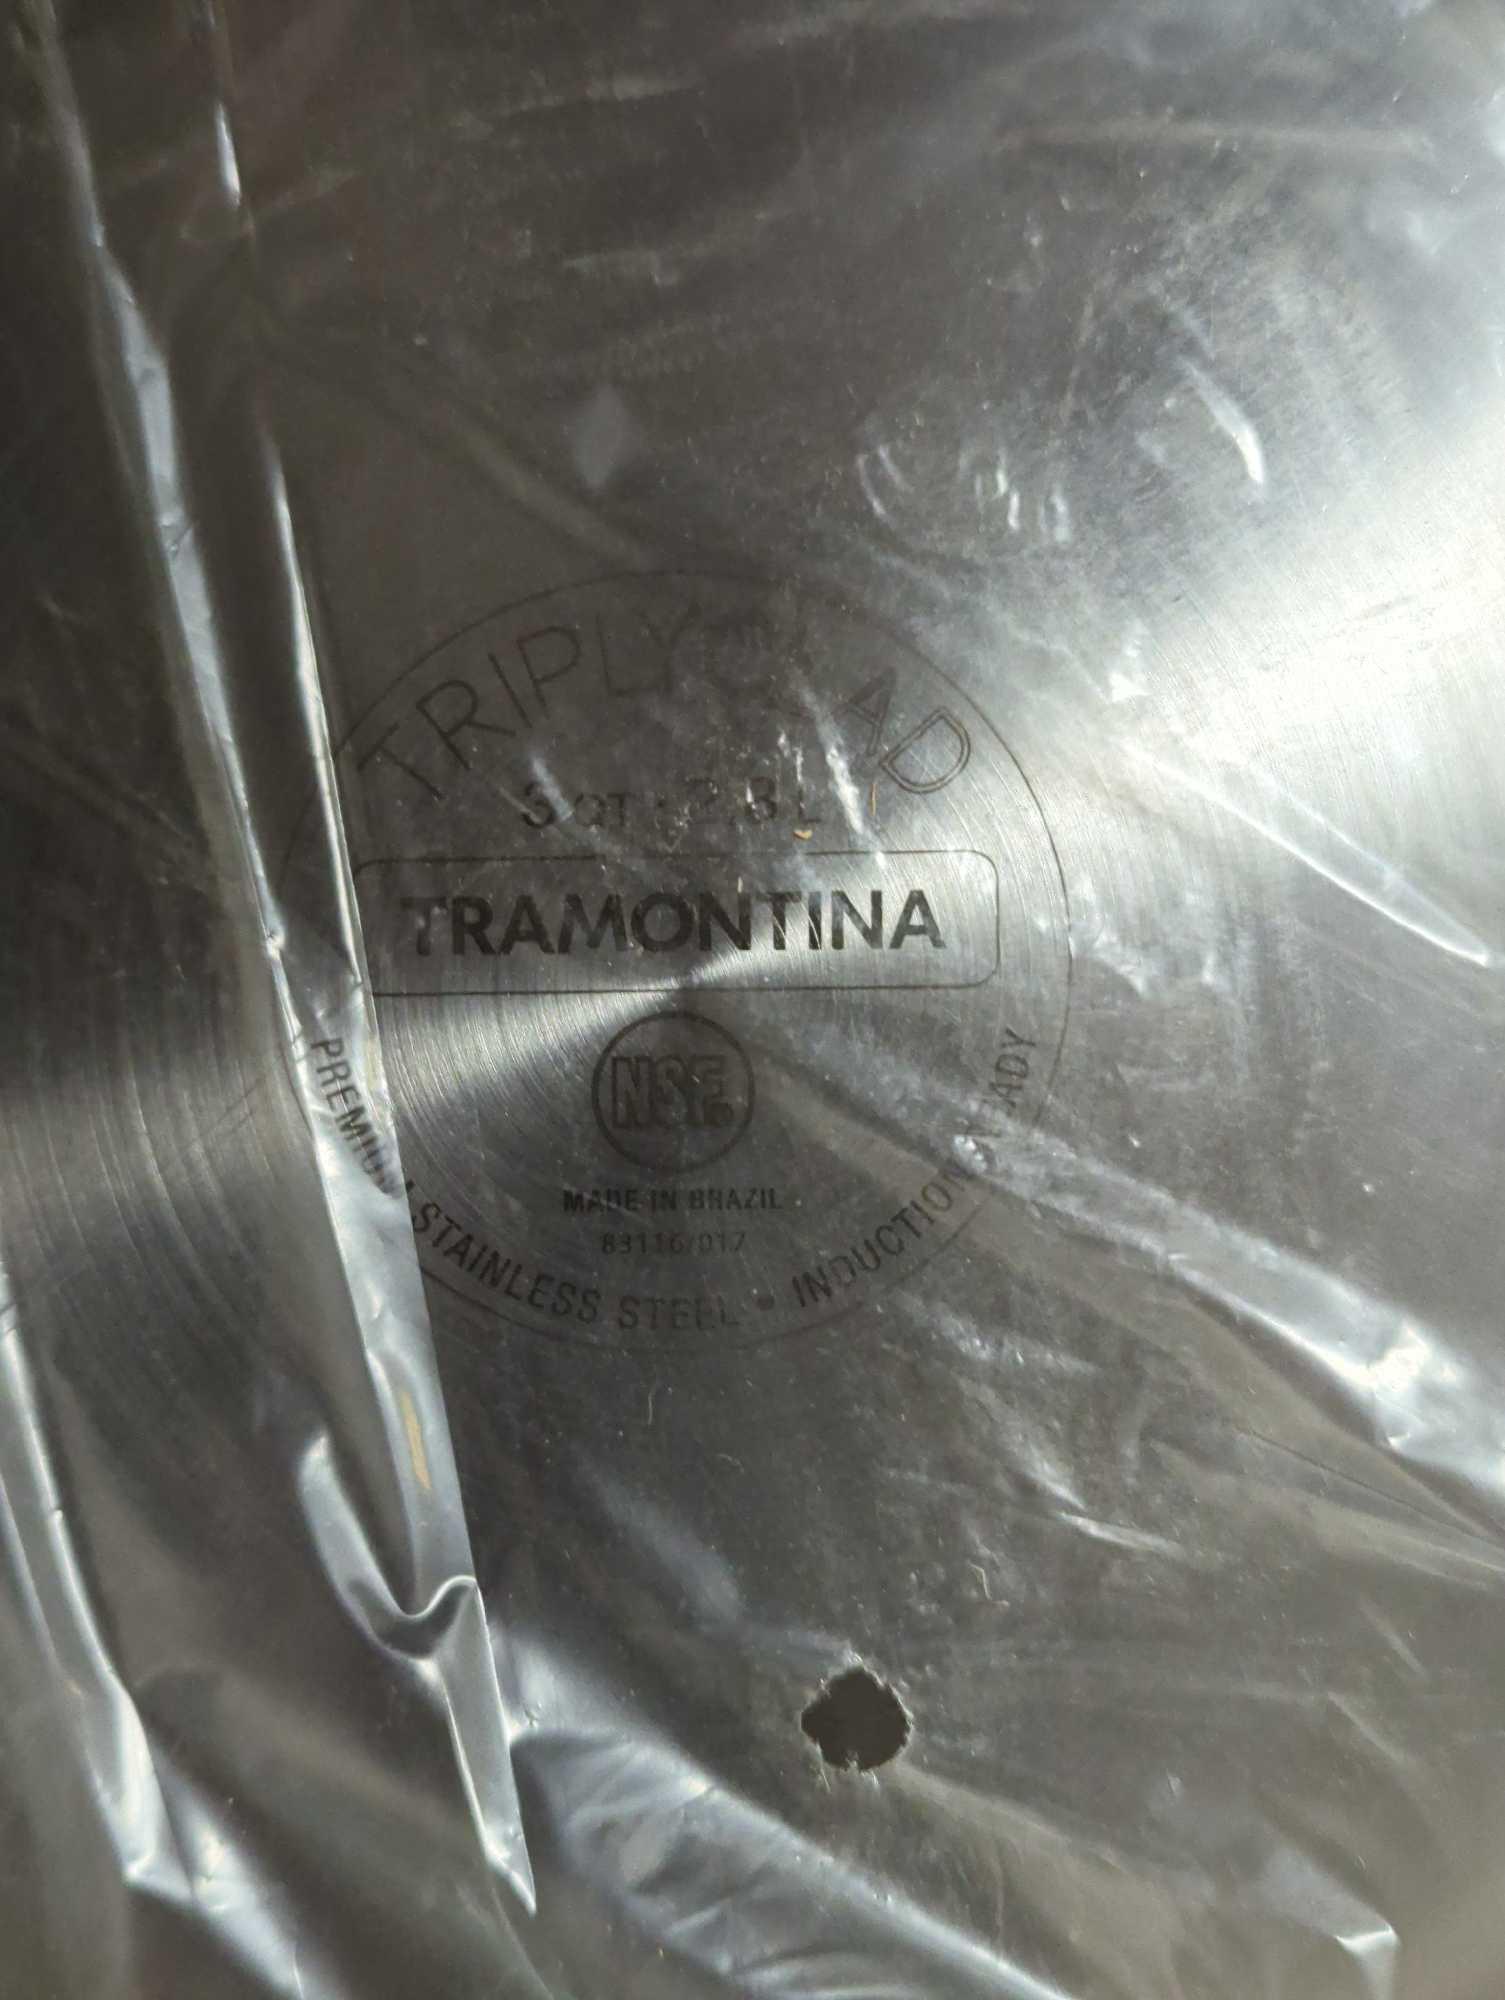 Tramontina Gourmet 3 Qt. Tri-Ply Clad Saucepan with Lid, Appears to be New in Open Box Retail Price